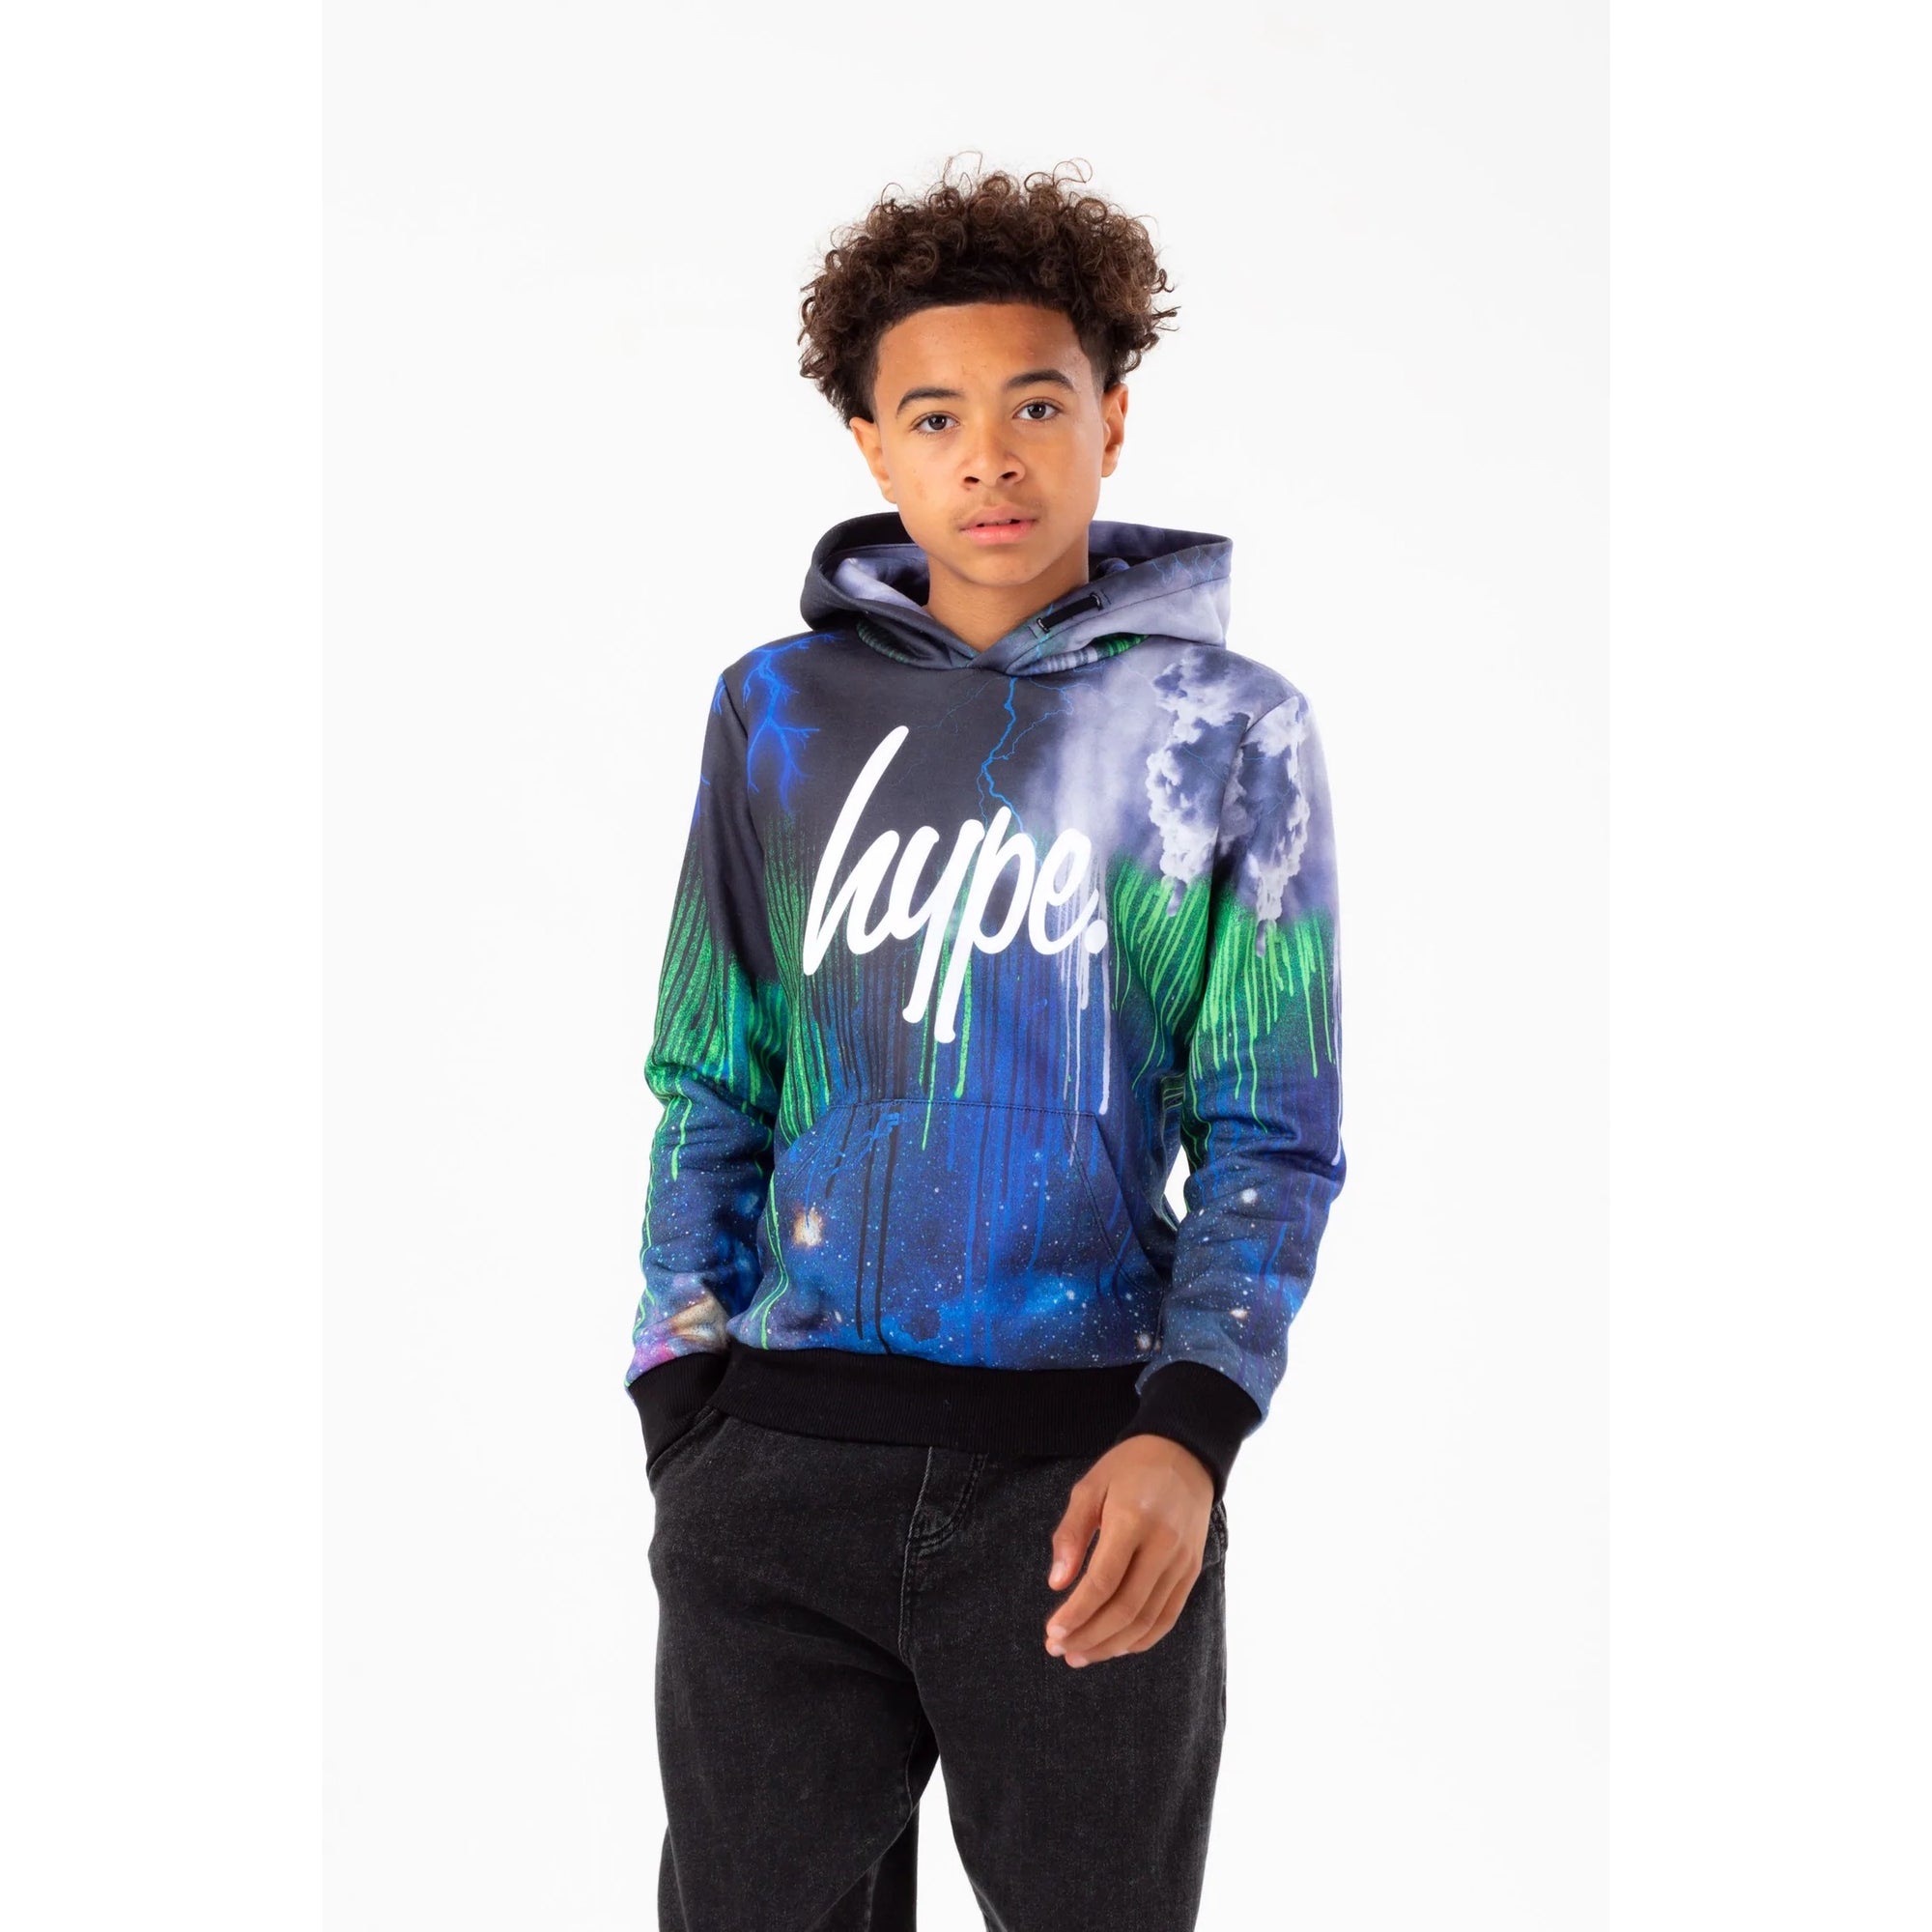 Hype Navy Storm Drips Hoodie Yvlr402 Clothing 7/8YRS / Blue,9/10YRS / Blue,11/12YRS / Blue,13YRS / Blue,14YRS / Blue,15YRS / Blue